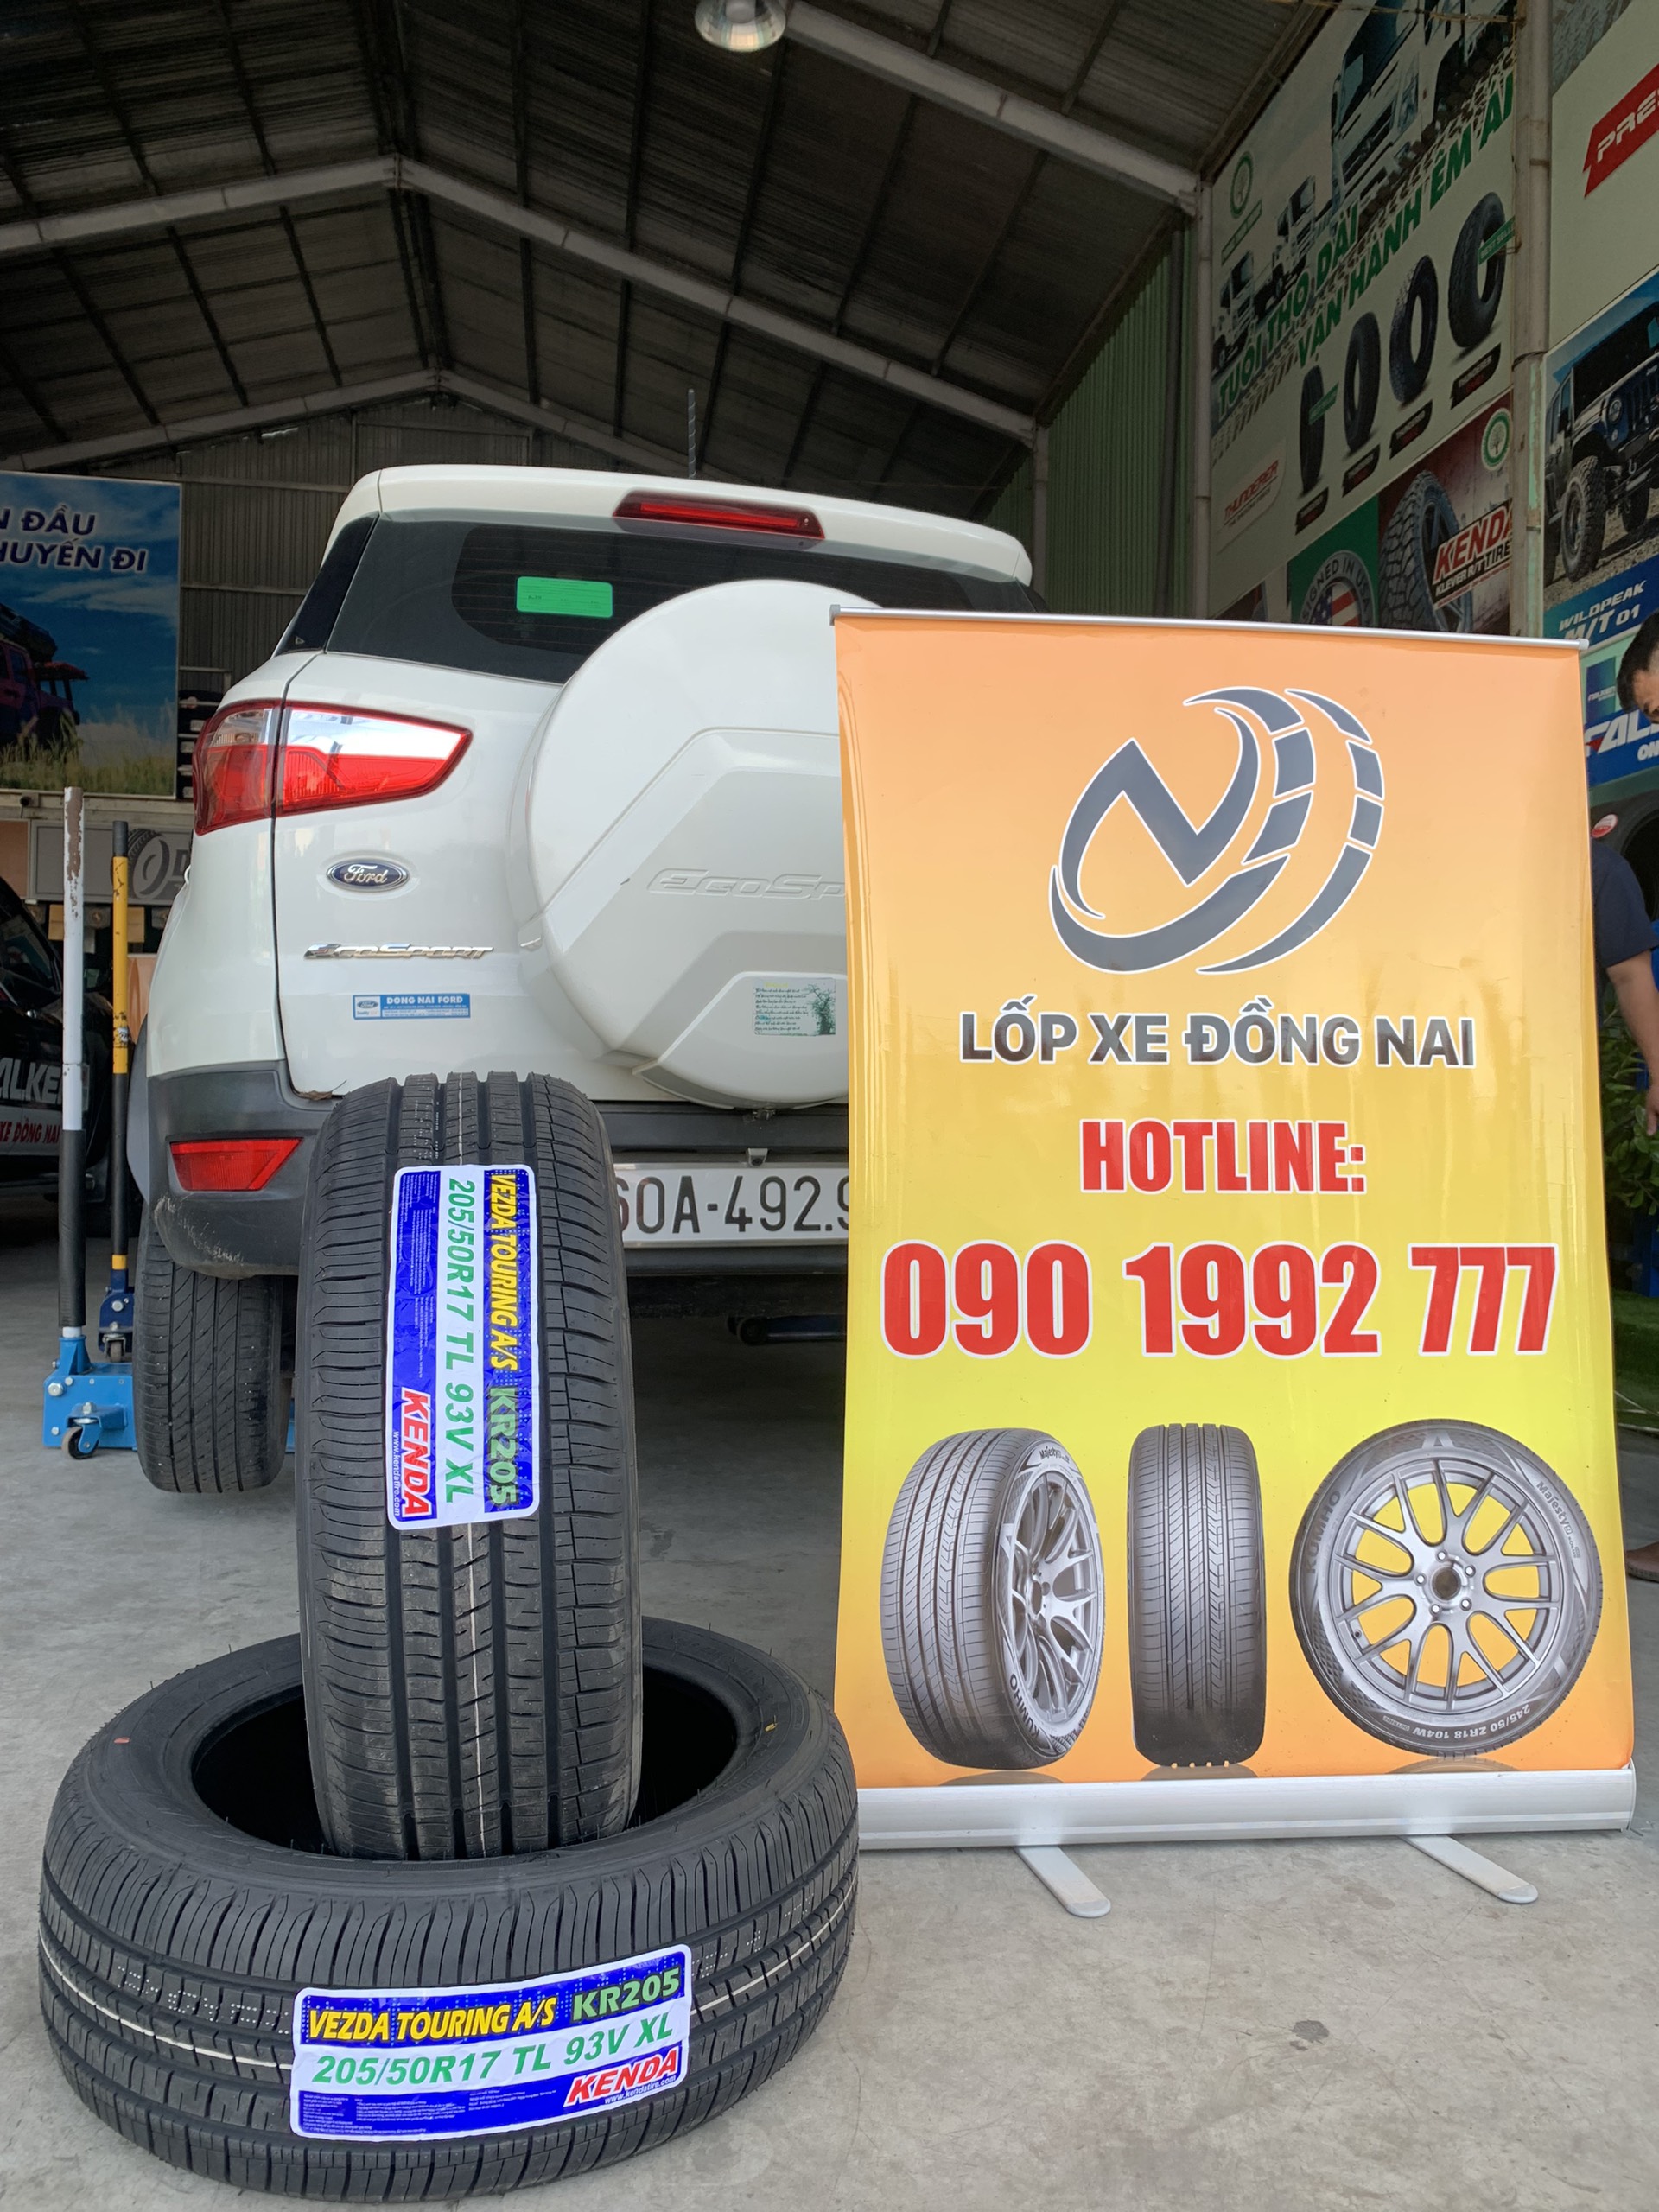 Review : Ford Ecosport thay lốp 205/50R17 Kenda Touring KR205